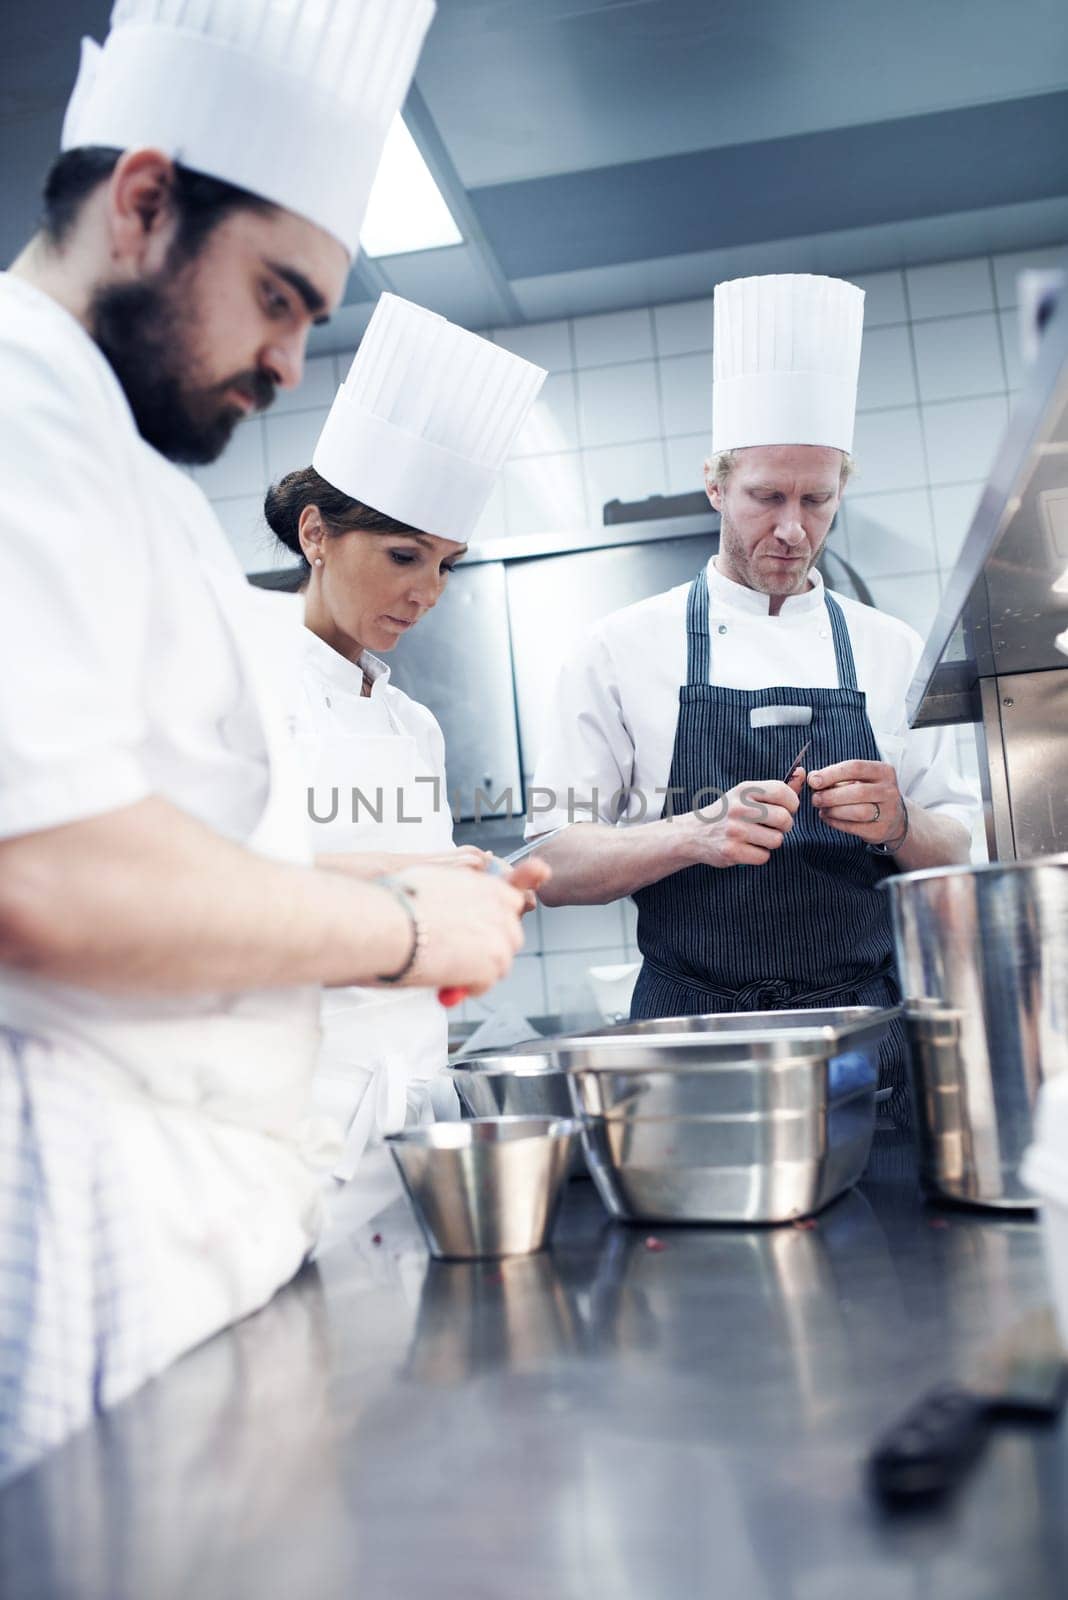 Everyone is working the line. chefs preparing a meal service in a professional kitchen. by YuriArcurs